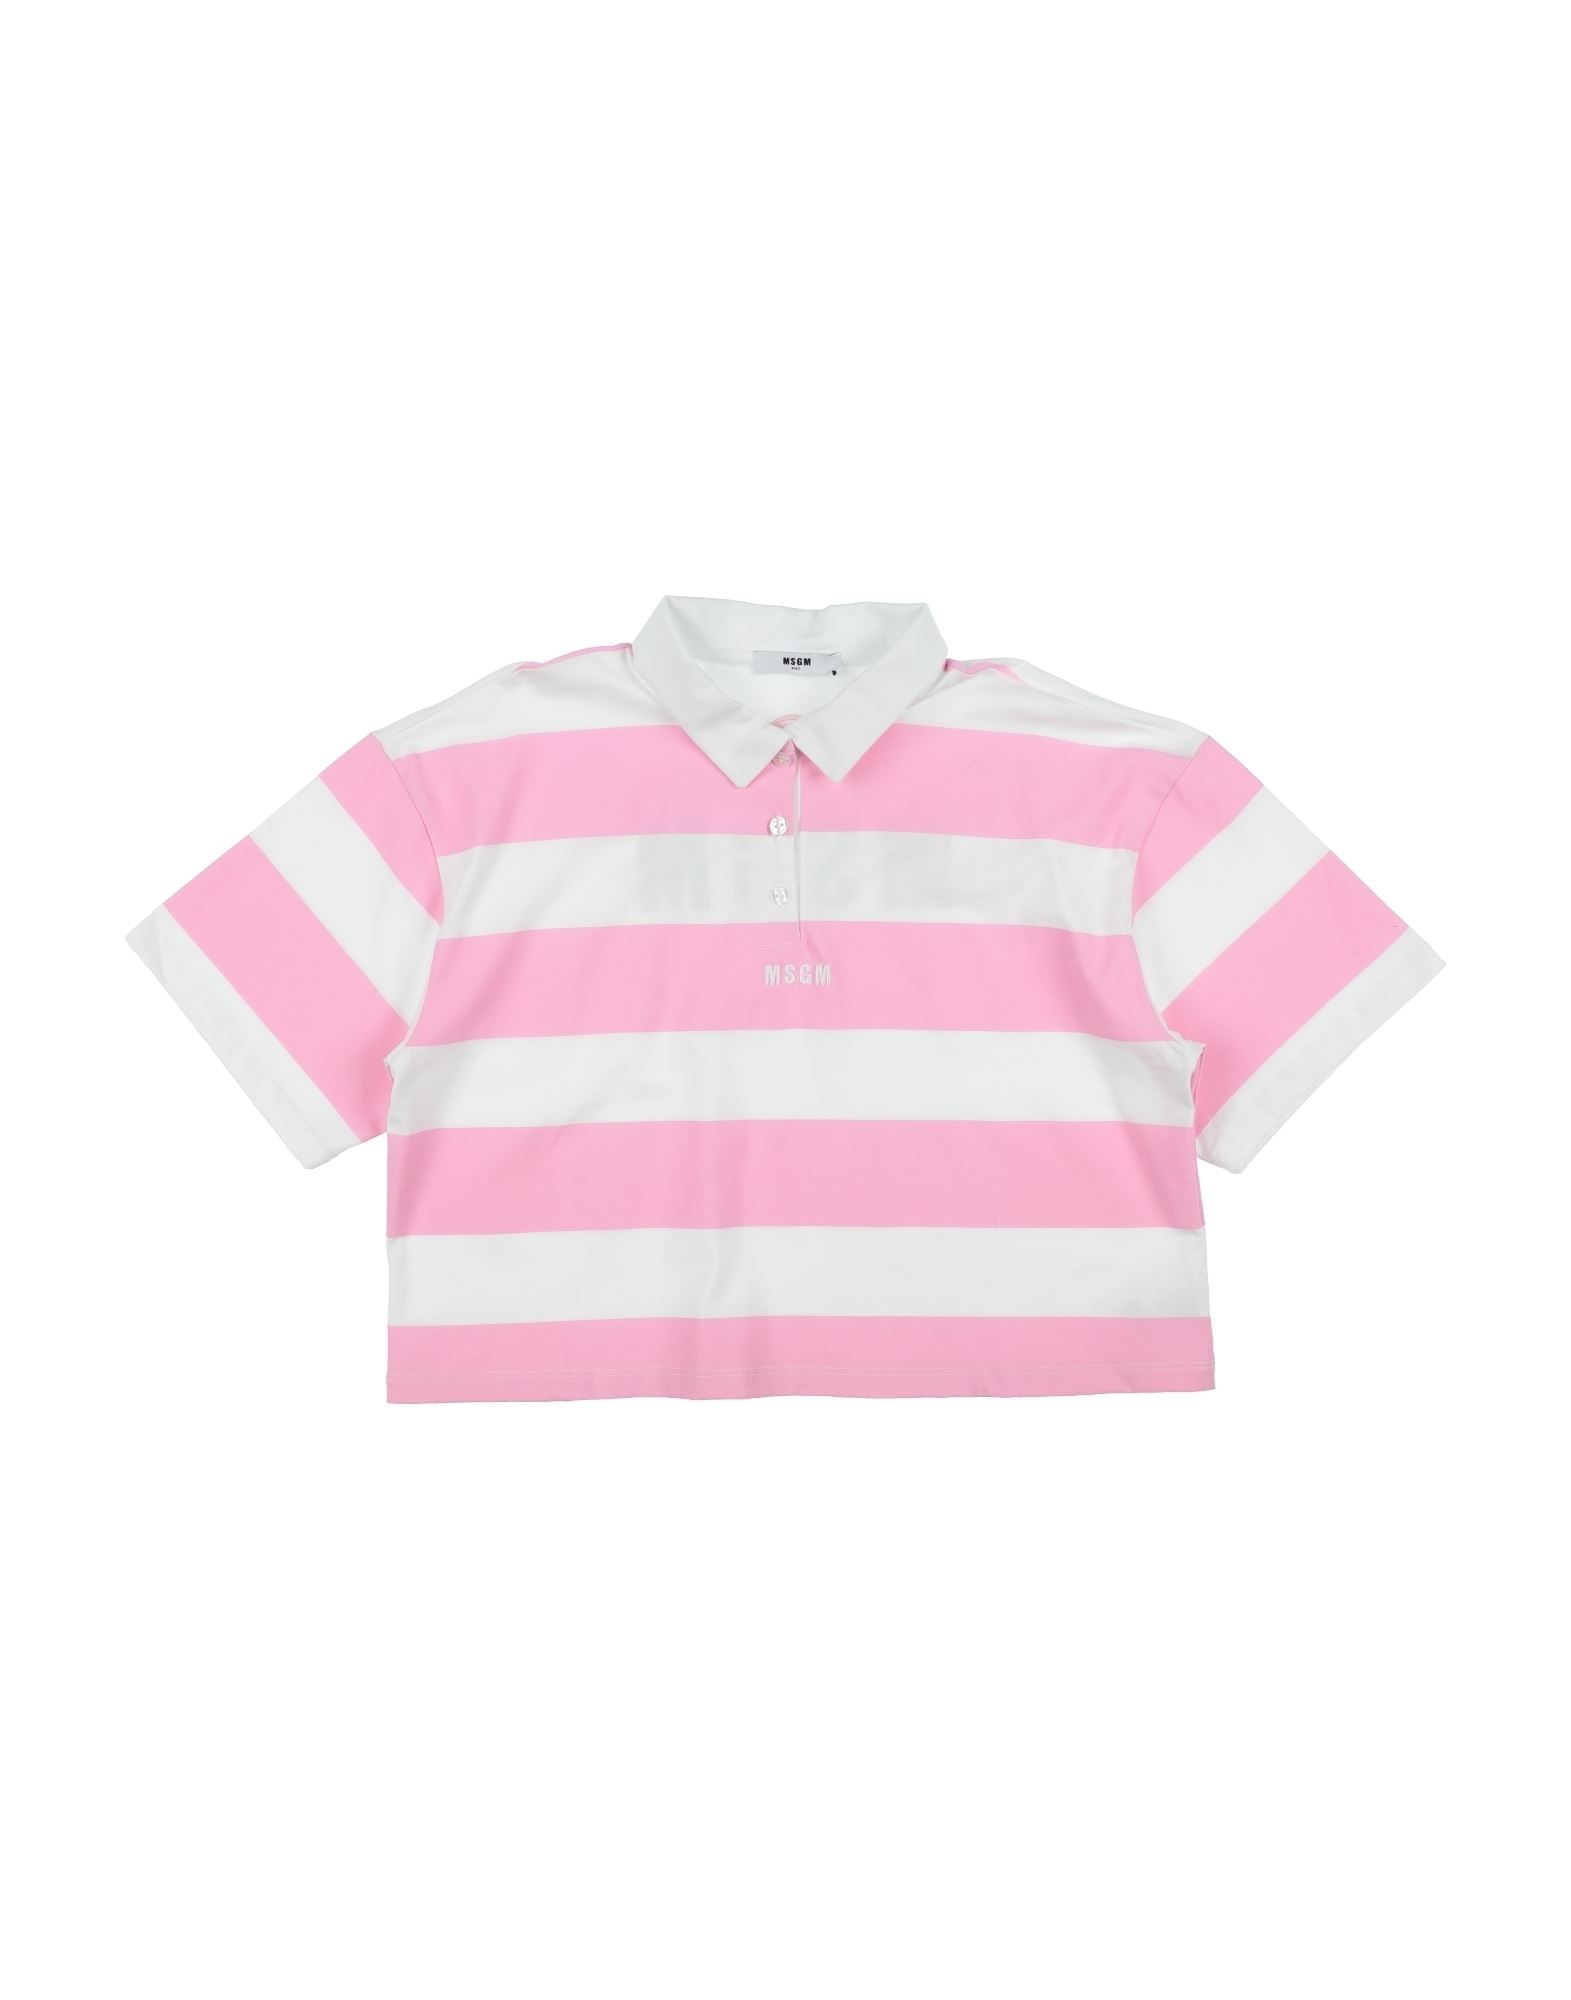 MSGM MSGM TODDLER GIRL POLO SHIRT PINK SIZE 6 COTTON